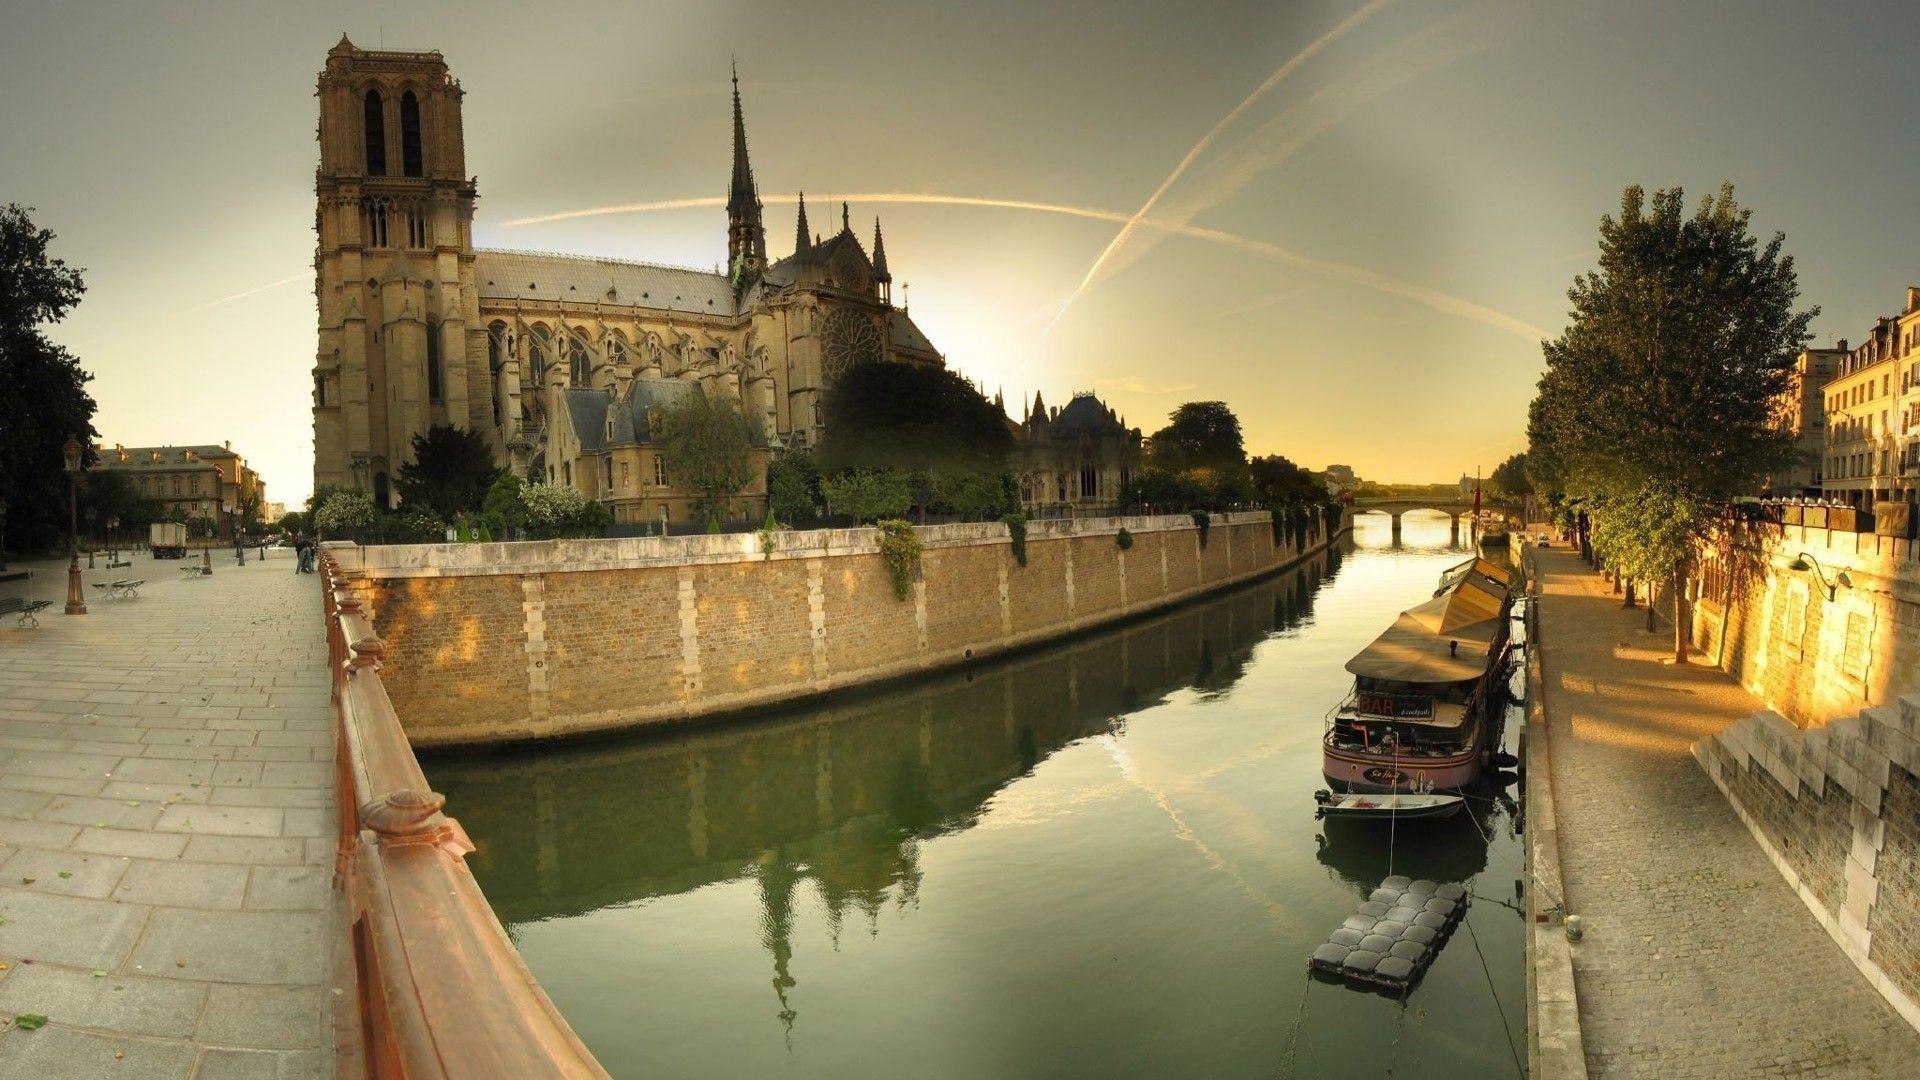 Notre dame cathedral by the seine river wallpaper. AllWallpaper